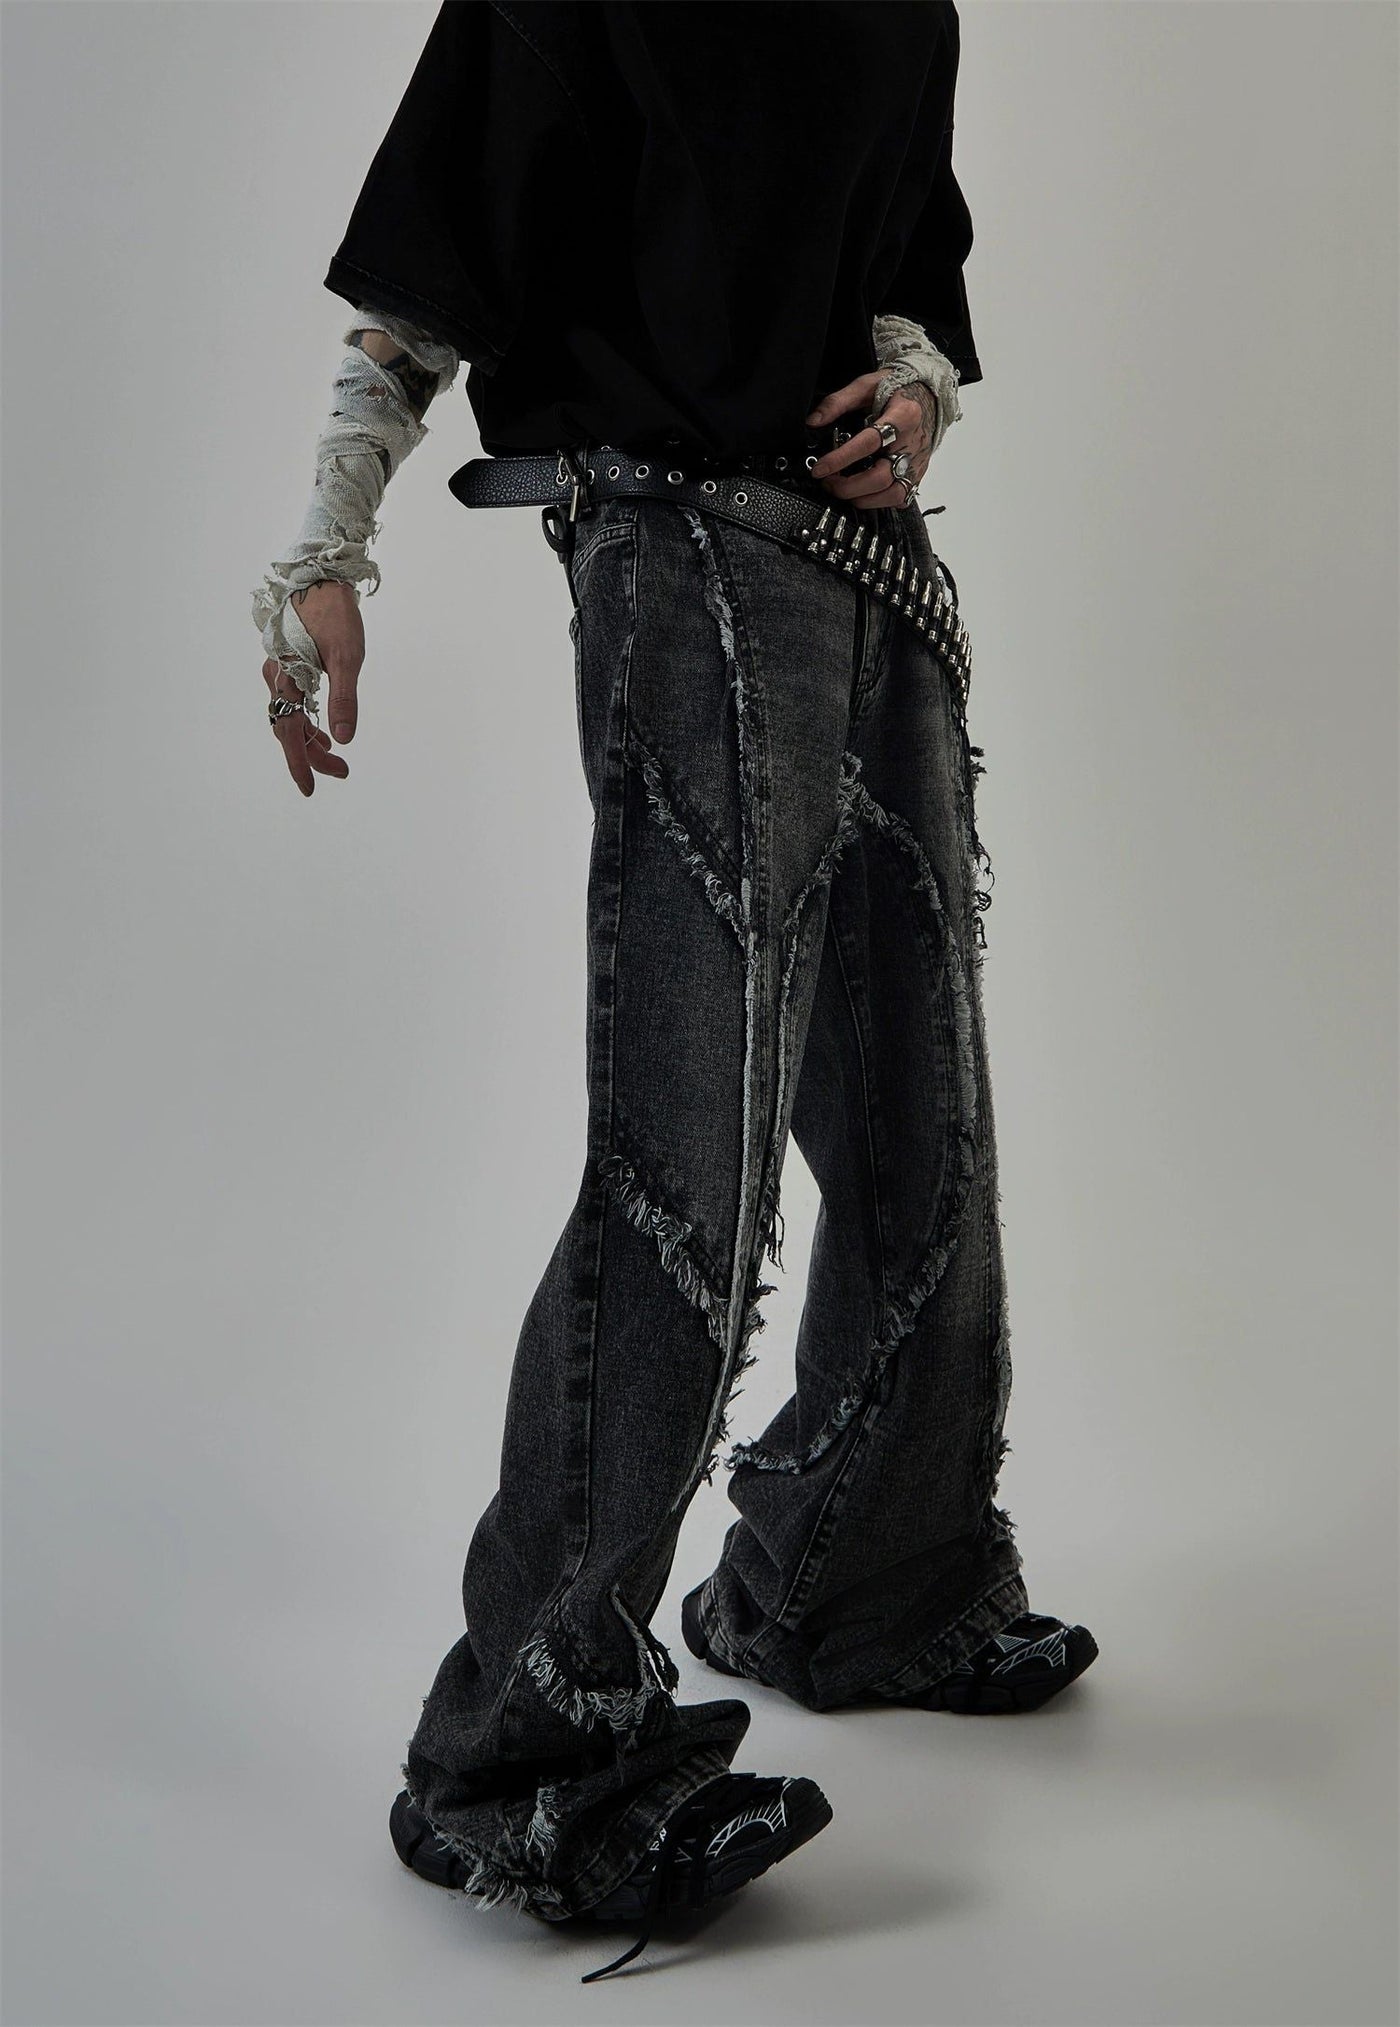 Stitched Raw Edge Flared Jeans Korean Street Fashion Jeans By Ash Dark Shop Online at OH Vault